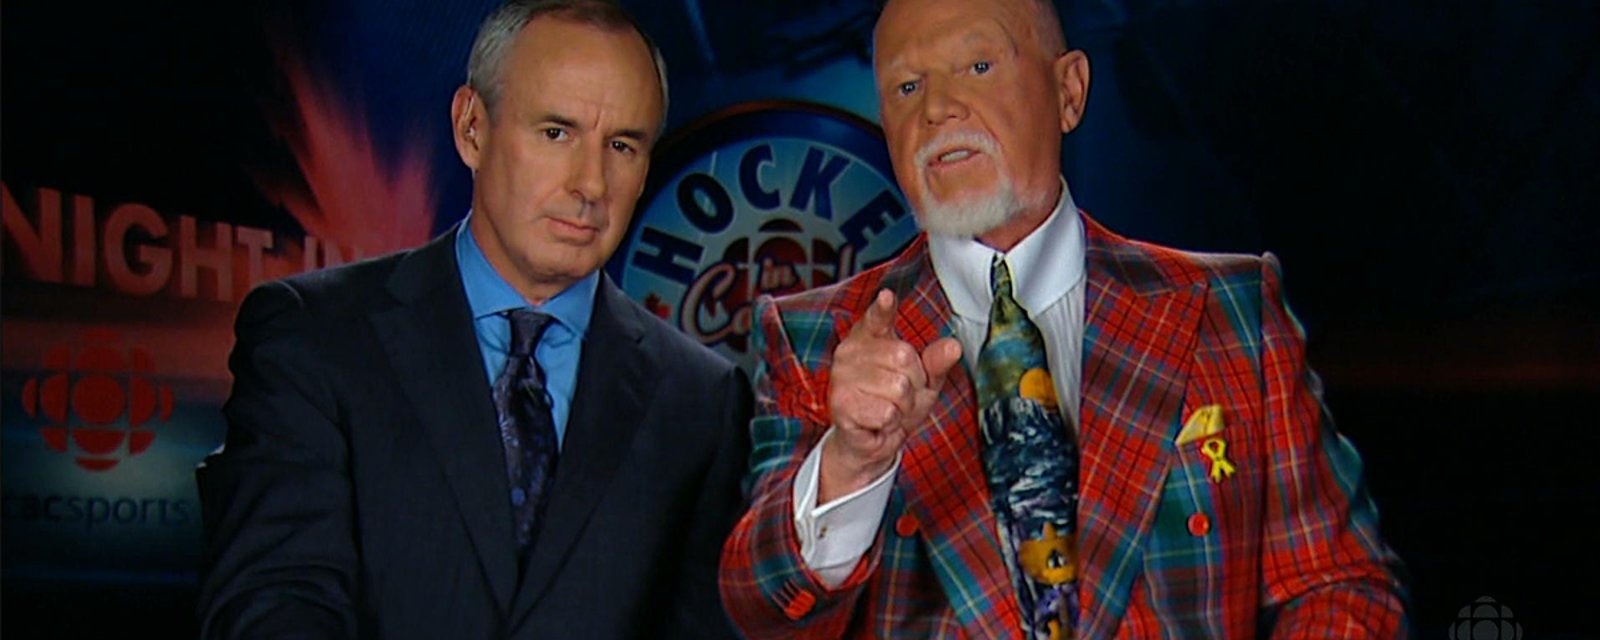 Don Cherry slams NHL goalies for whining